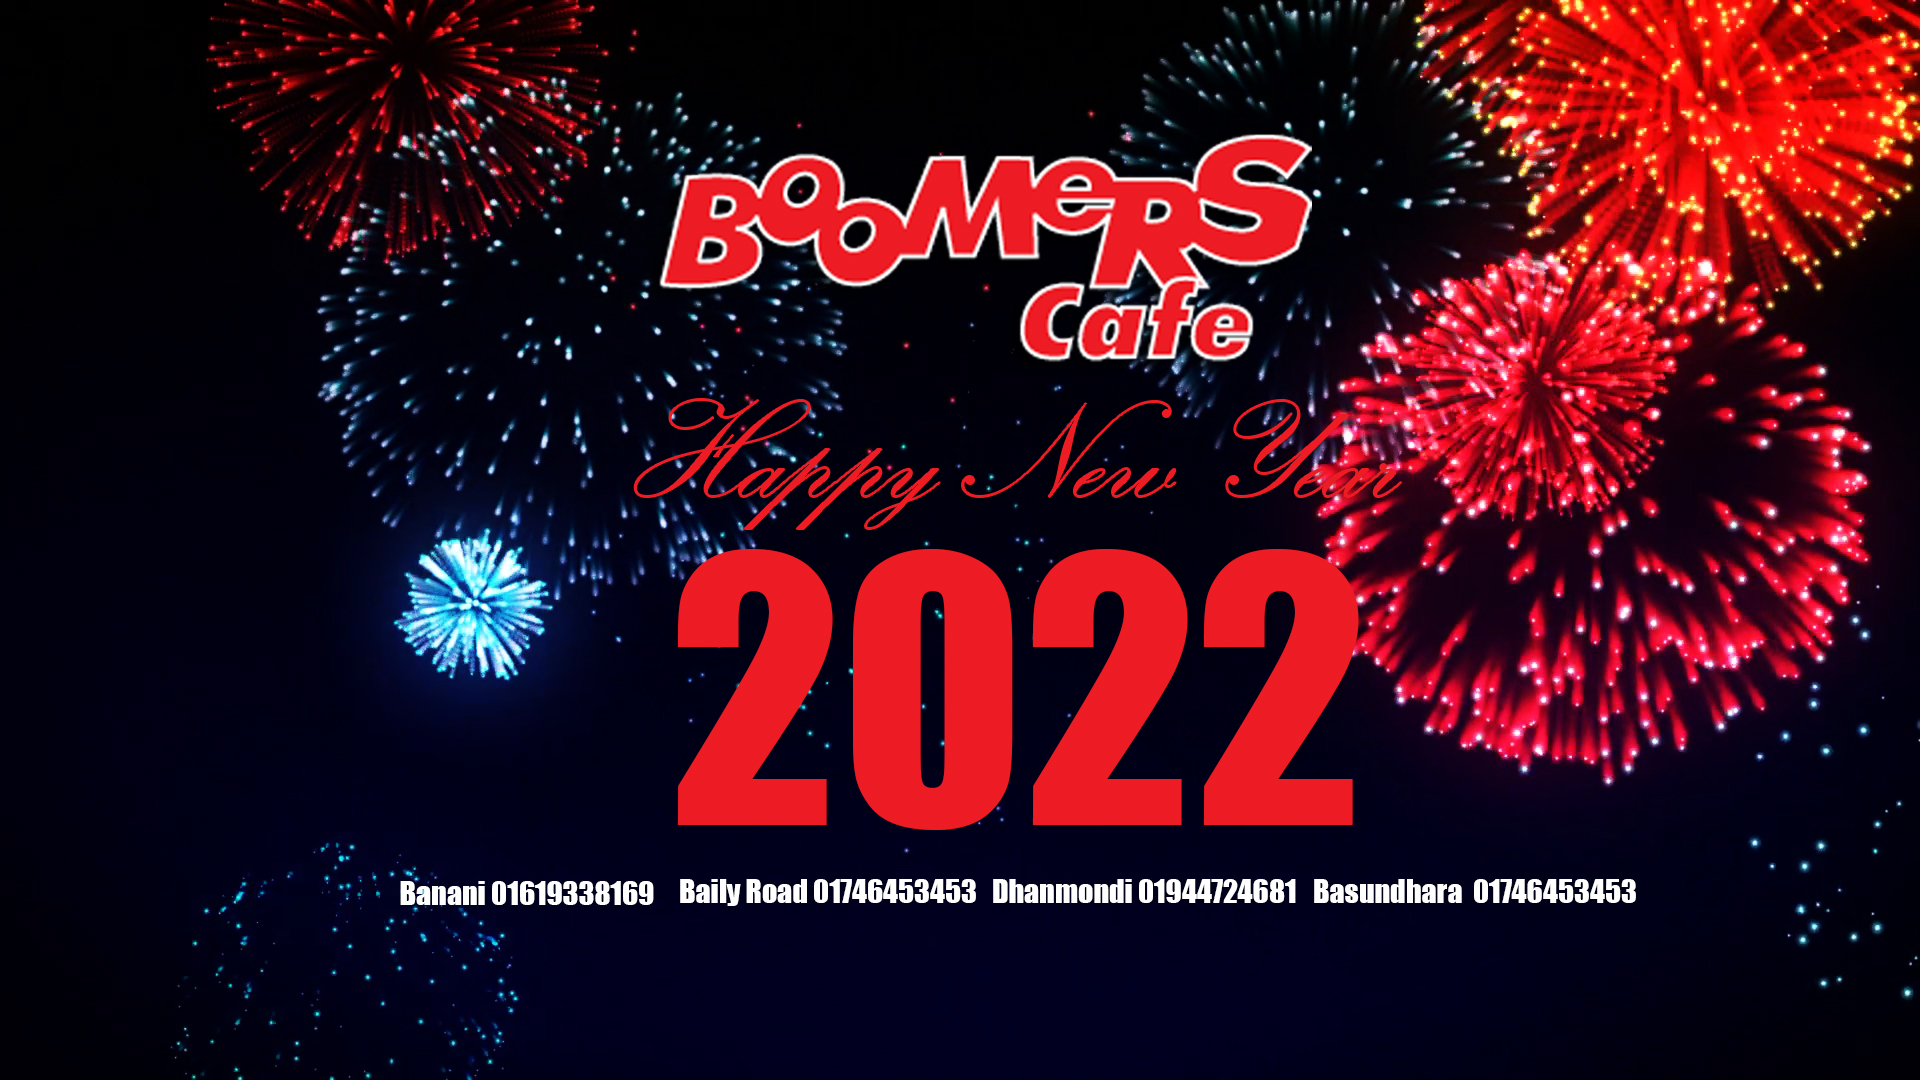 Photo of Boomers Cafe Restaurant Dhanmondi Menu Price, Delivery, Location and Contact Number